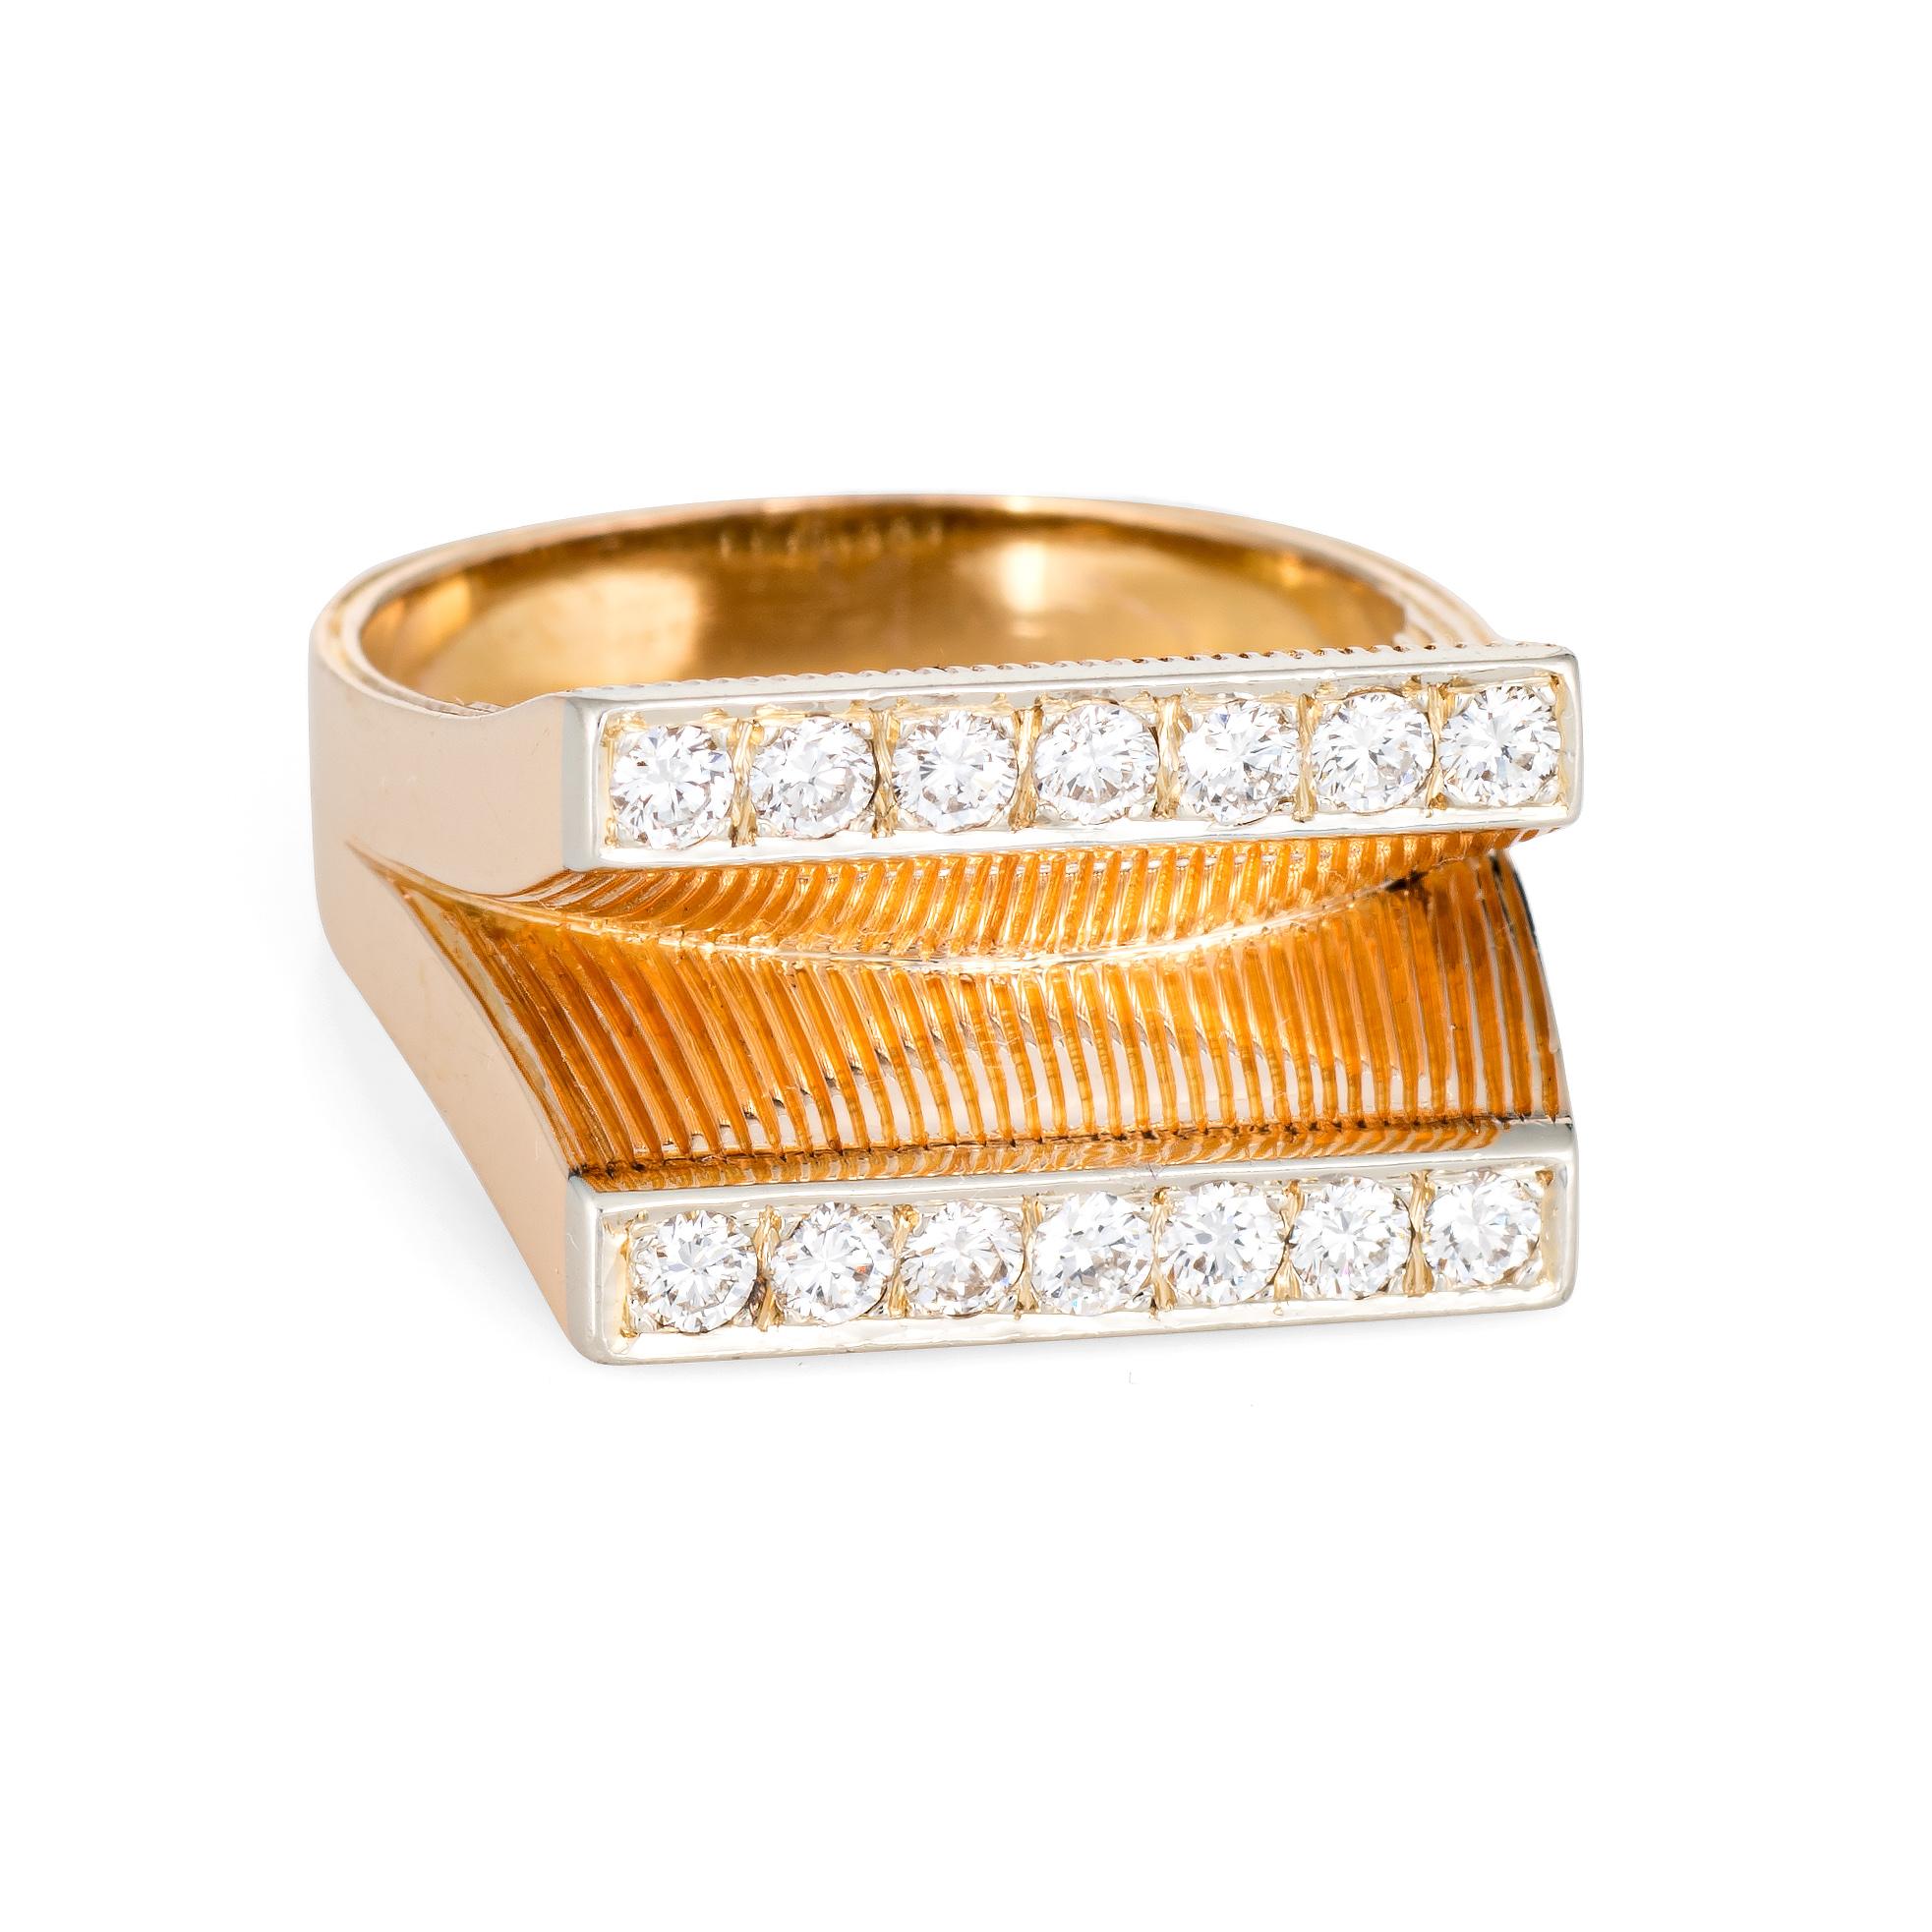 Finely detailed vintage diamond double bar ring (circa 1980s) crafted in 14 karat yellow gold. 

14 round brilliant cut diamonds are estimated at 0.04 carats each and total an estimated 0.56 carats (estimated at G-H color and VS2-SI1 clarity). 

The